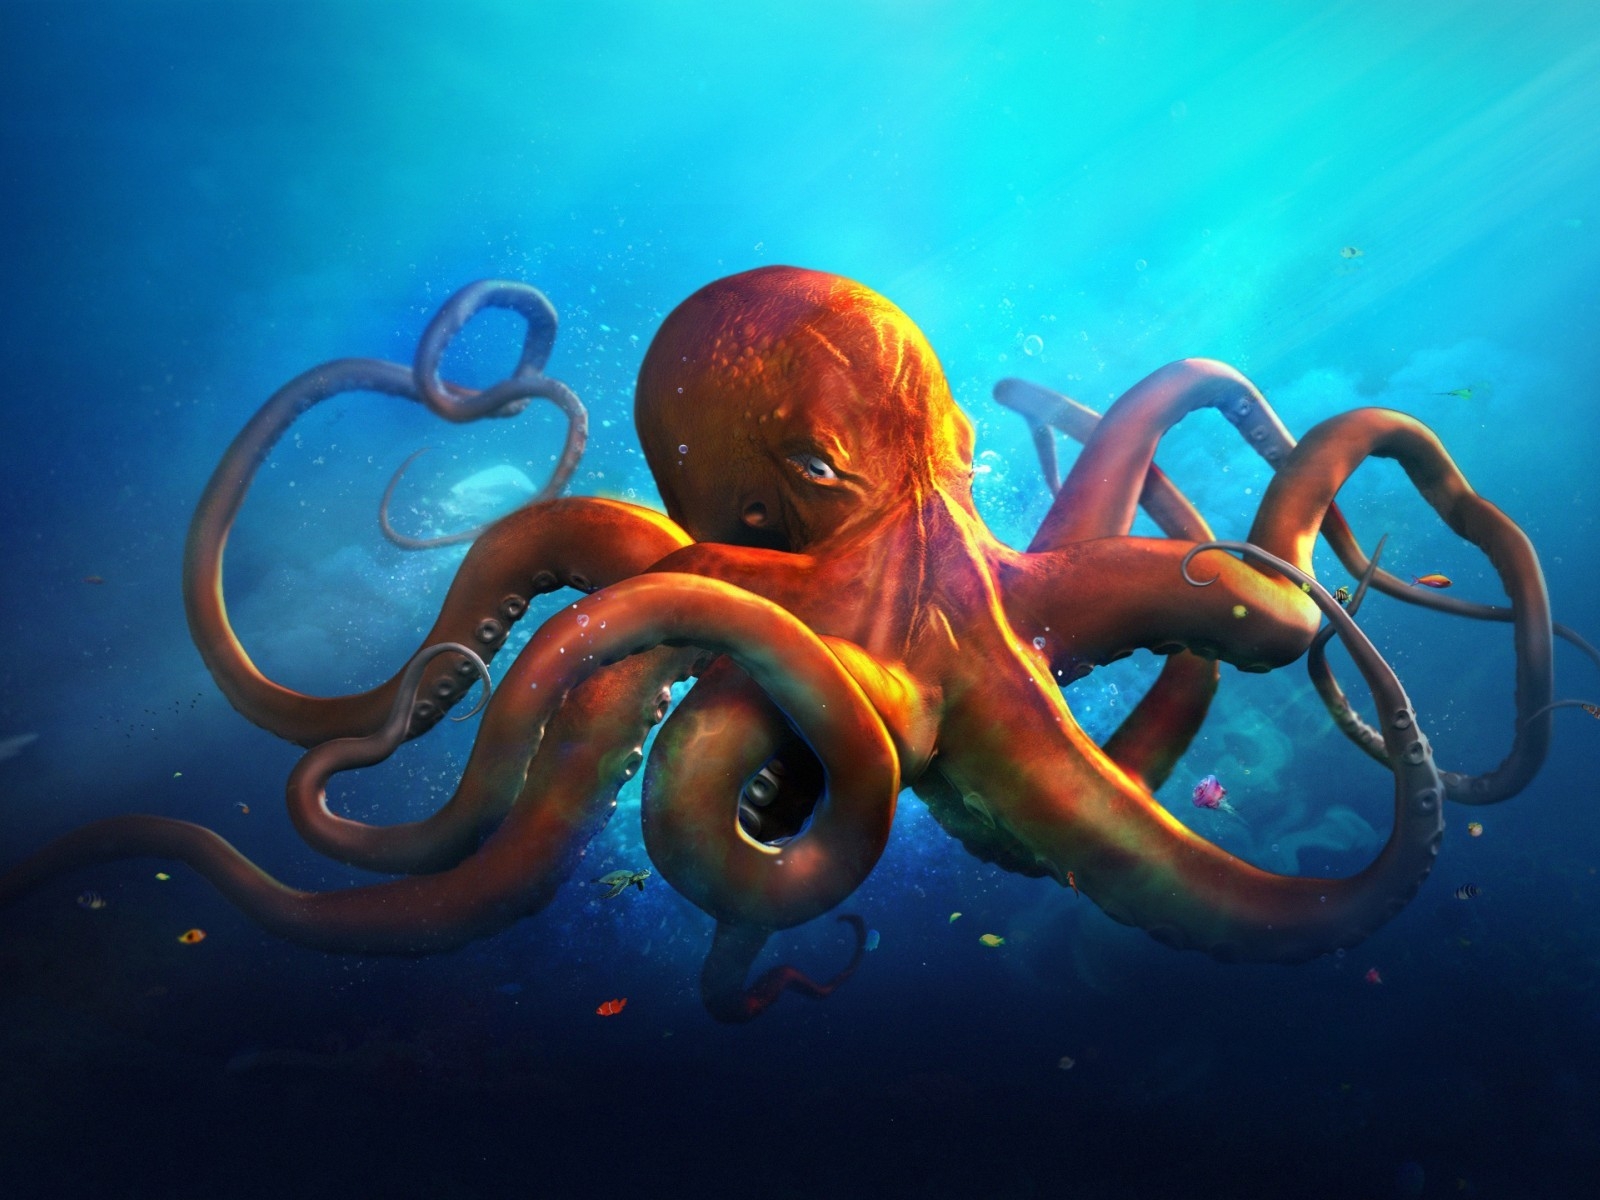 Just an Octopus for 1600 x 1200 resolution